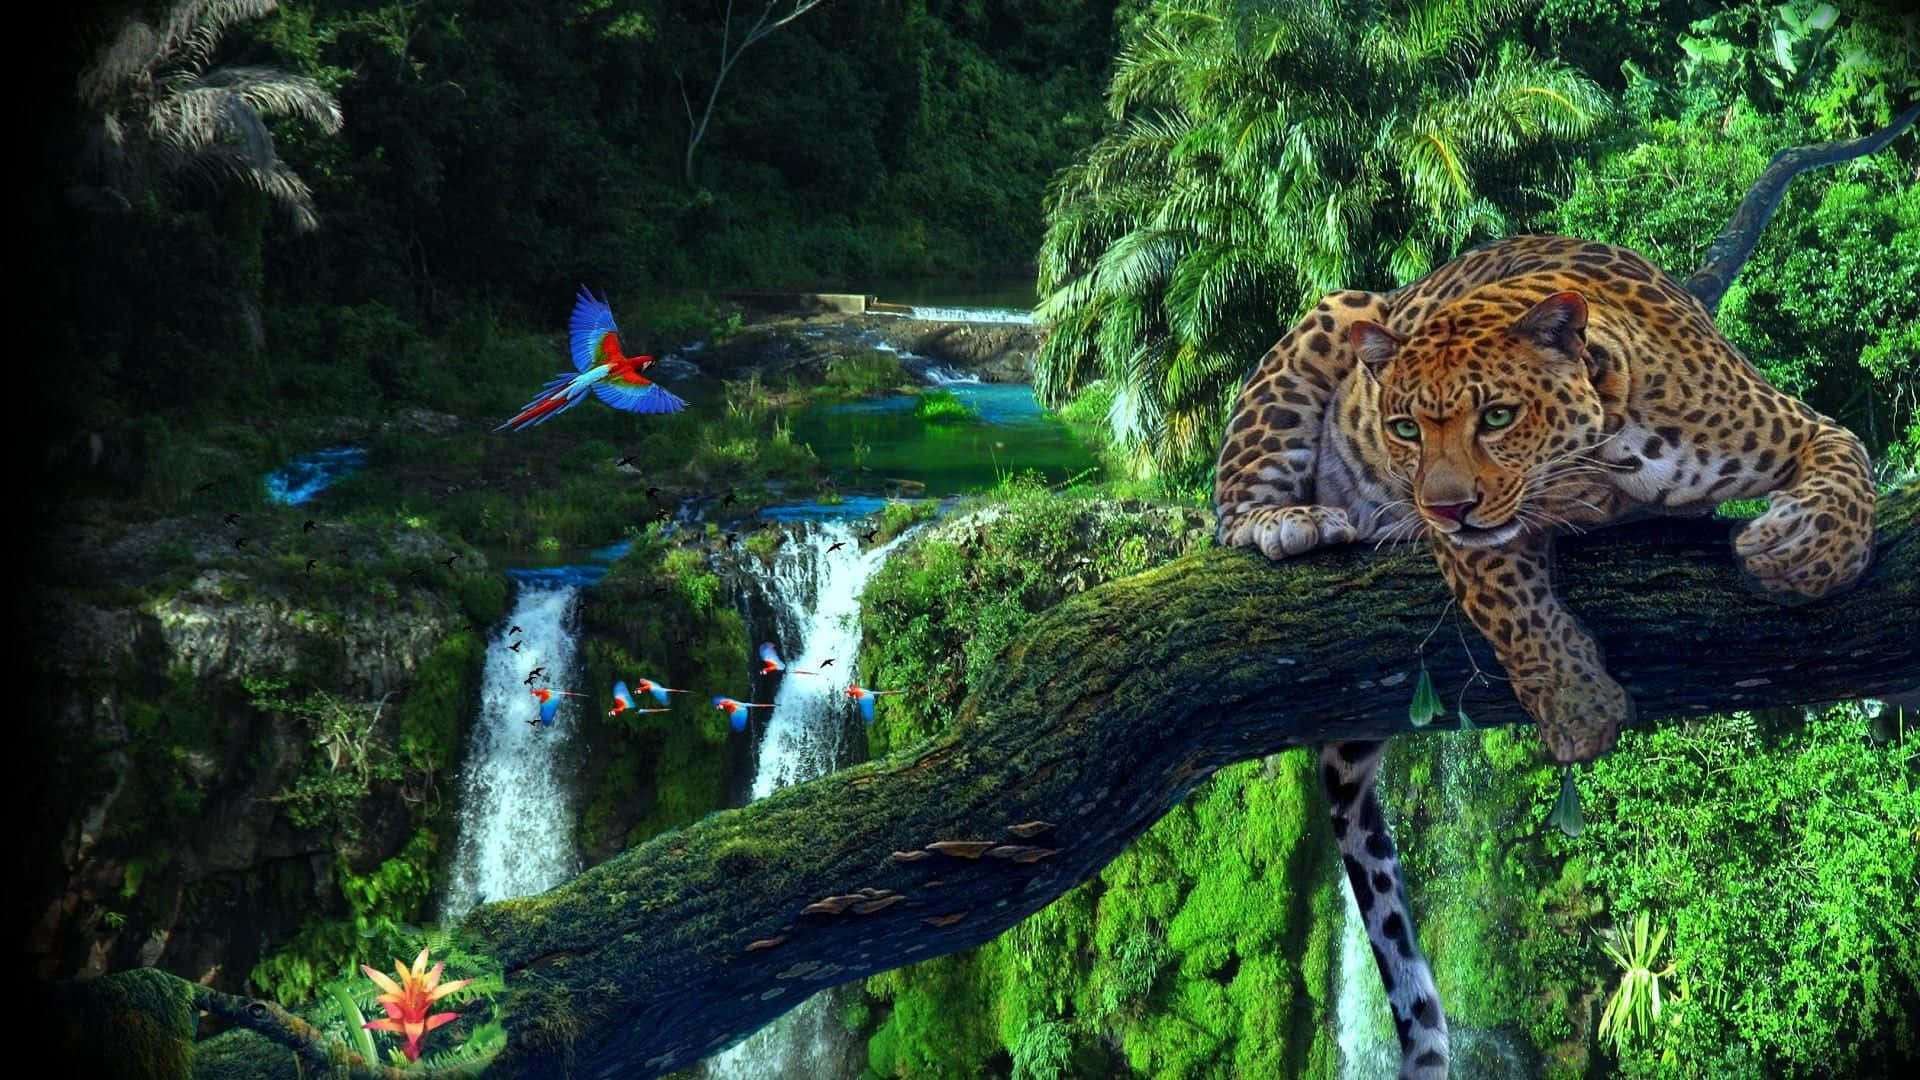 A Leopard Is Sitting On A Branch With Birds And Waterfall